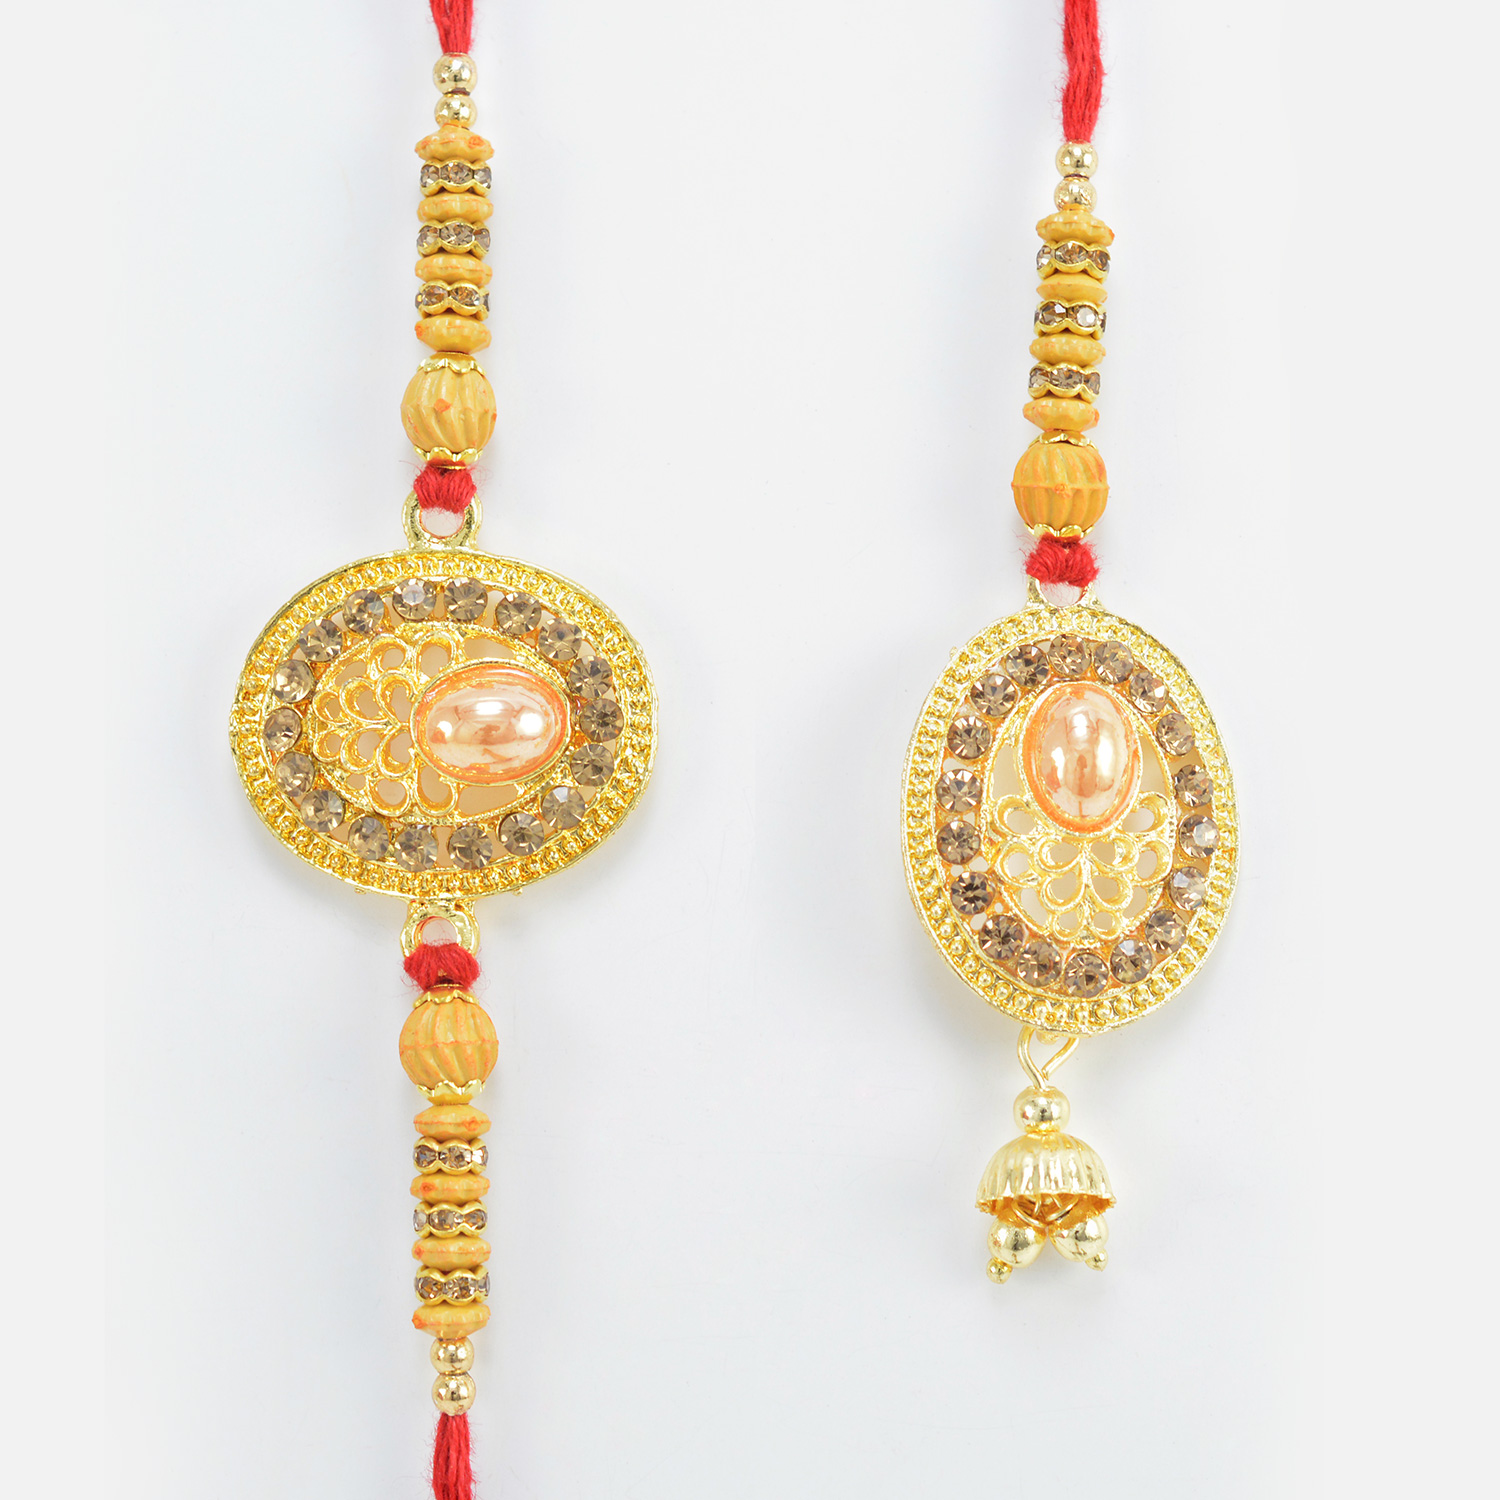 Pearl and Jewel Studded on Golden Design Rakhis for Brother and Bhabhi